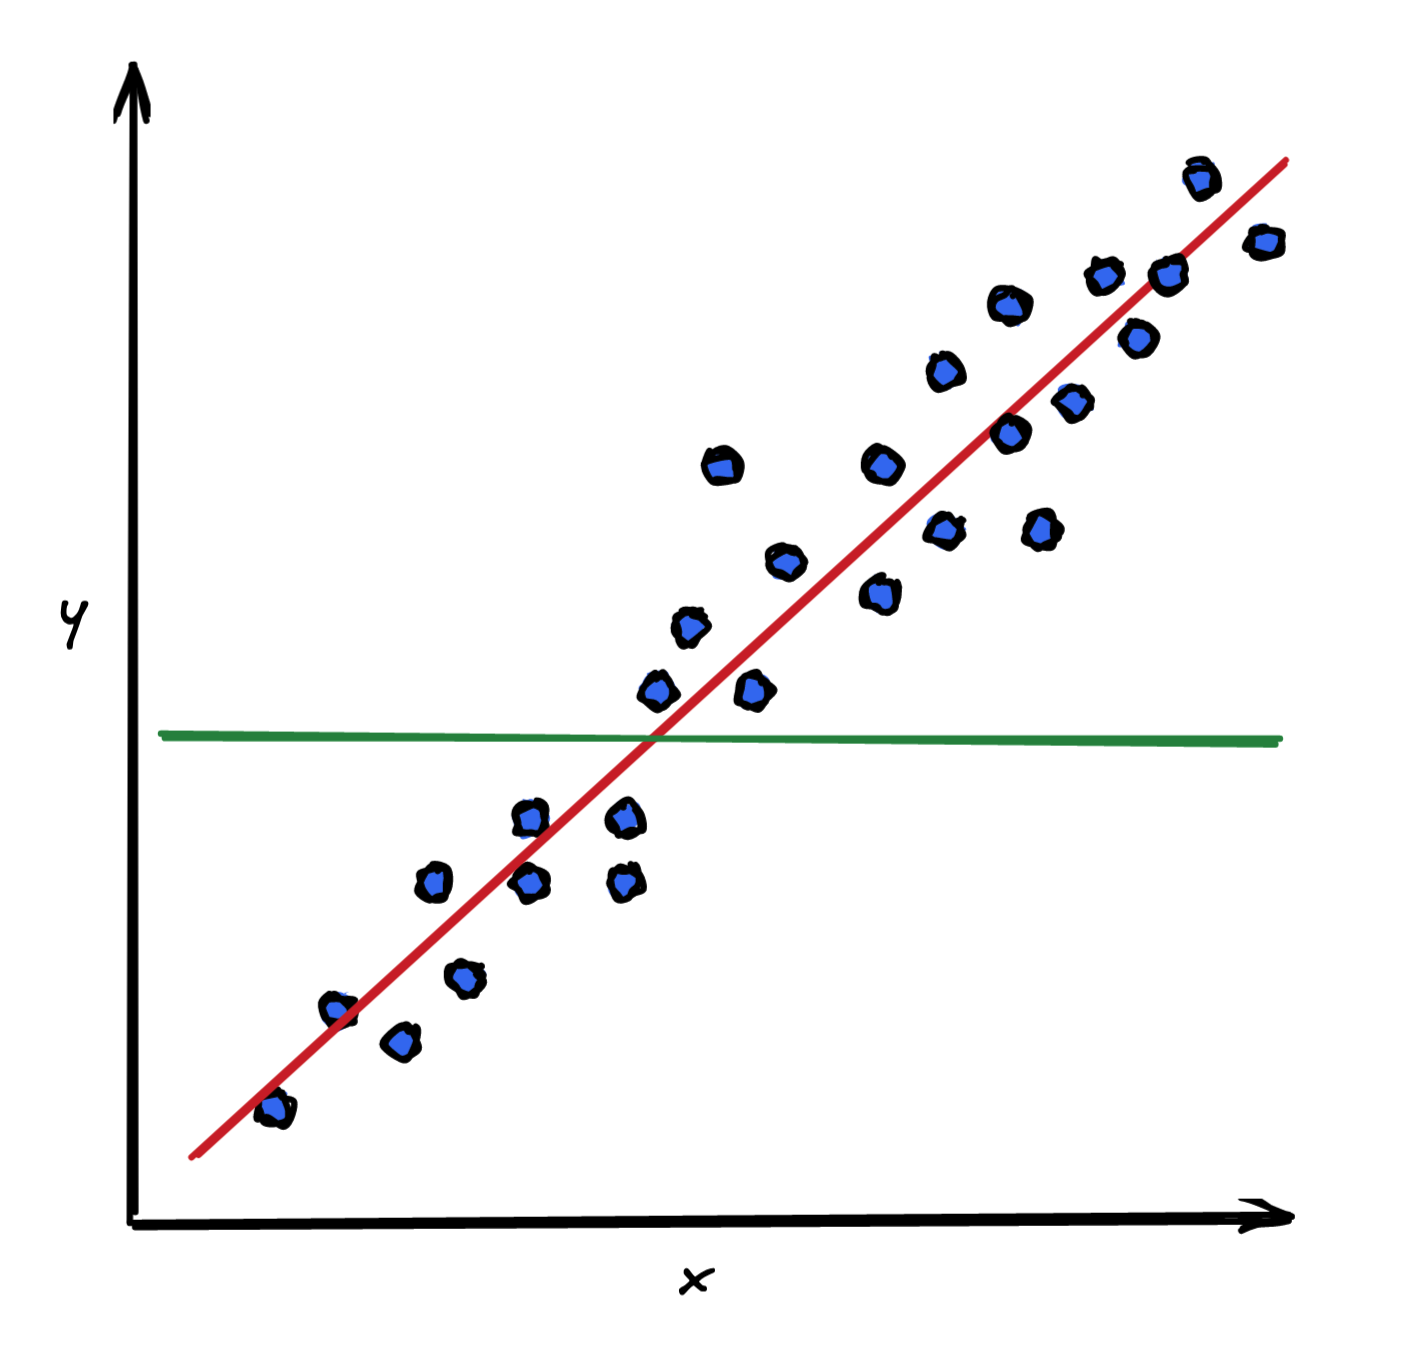 Line graph showing the comparison of a linear model’s fit to a mean benchmark